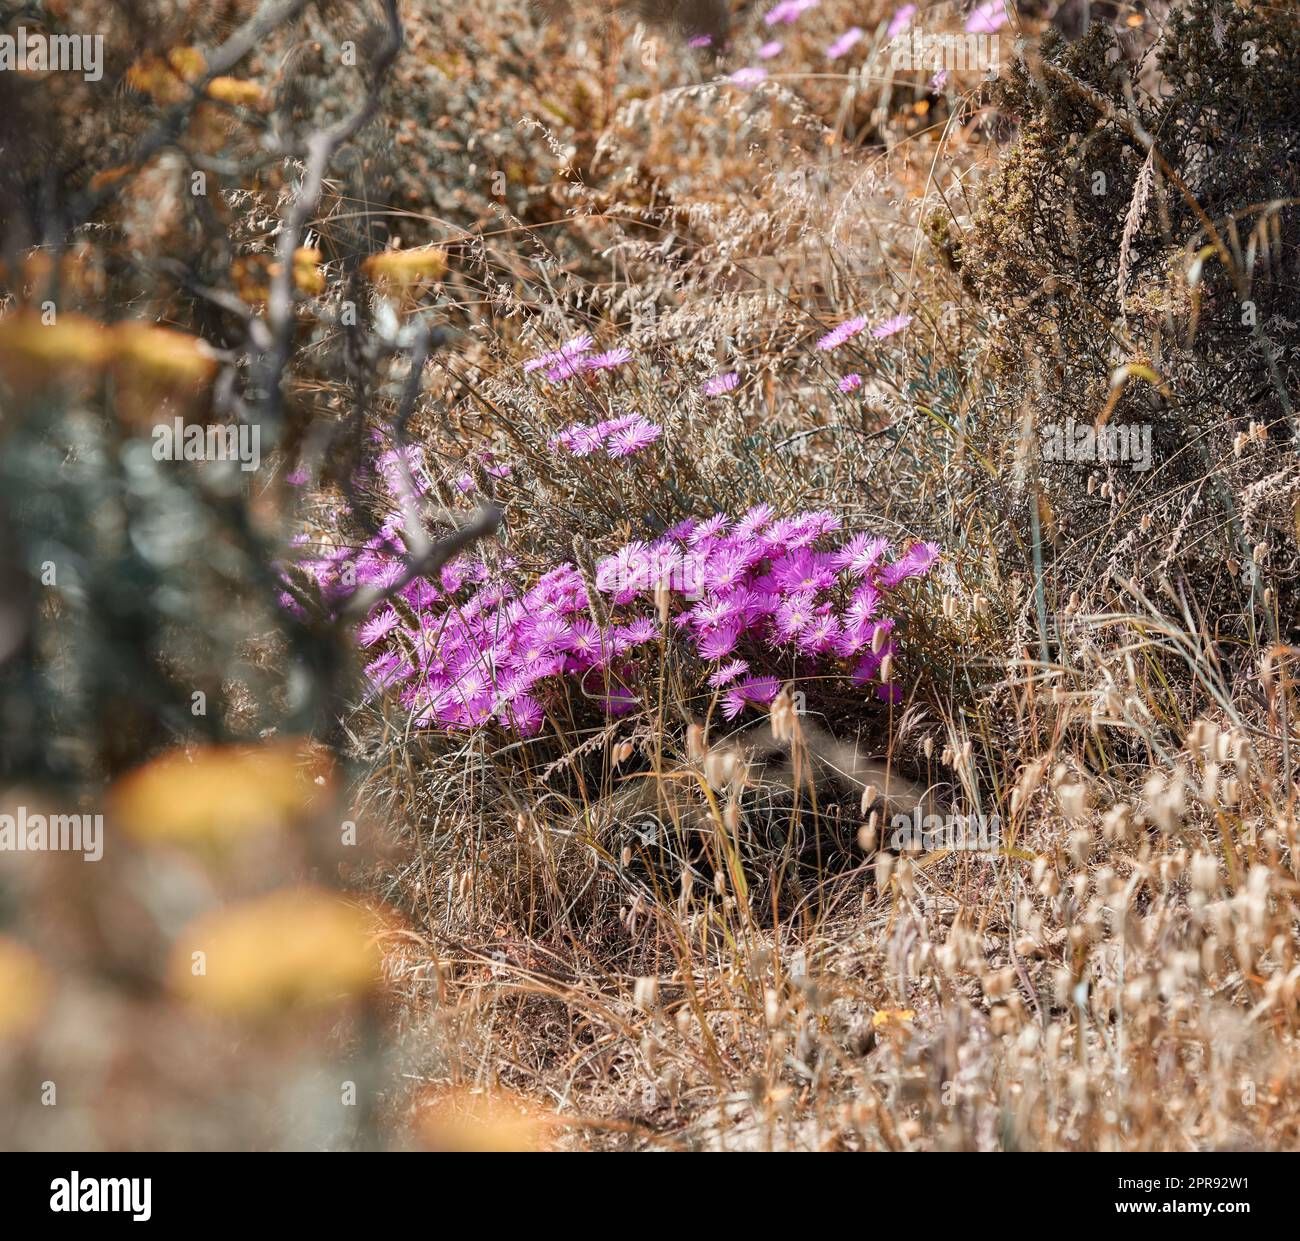 Pink trailing ice plant flowers growing in drying autumn grass in remote countryside meadow, field or a nature reserve. Desaturated view of bushes, shrubs and flora in peaceful, serene and wild land Stock Photo